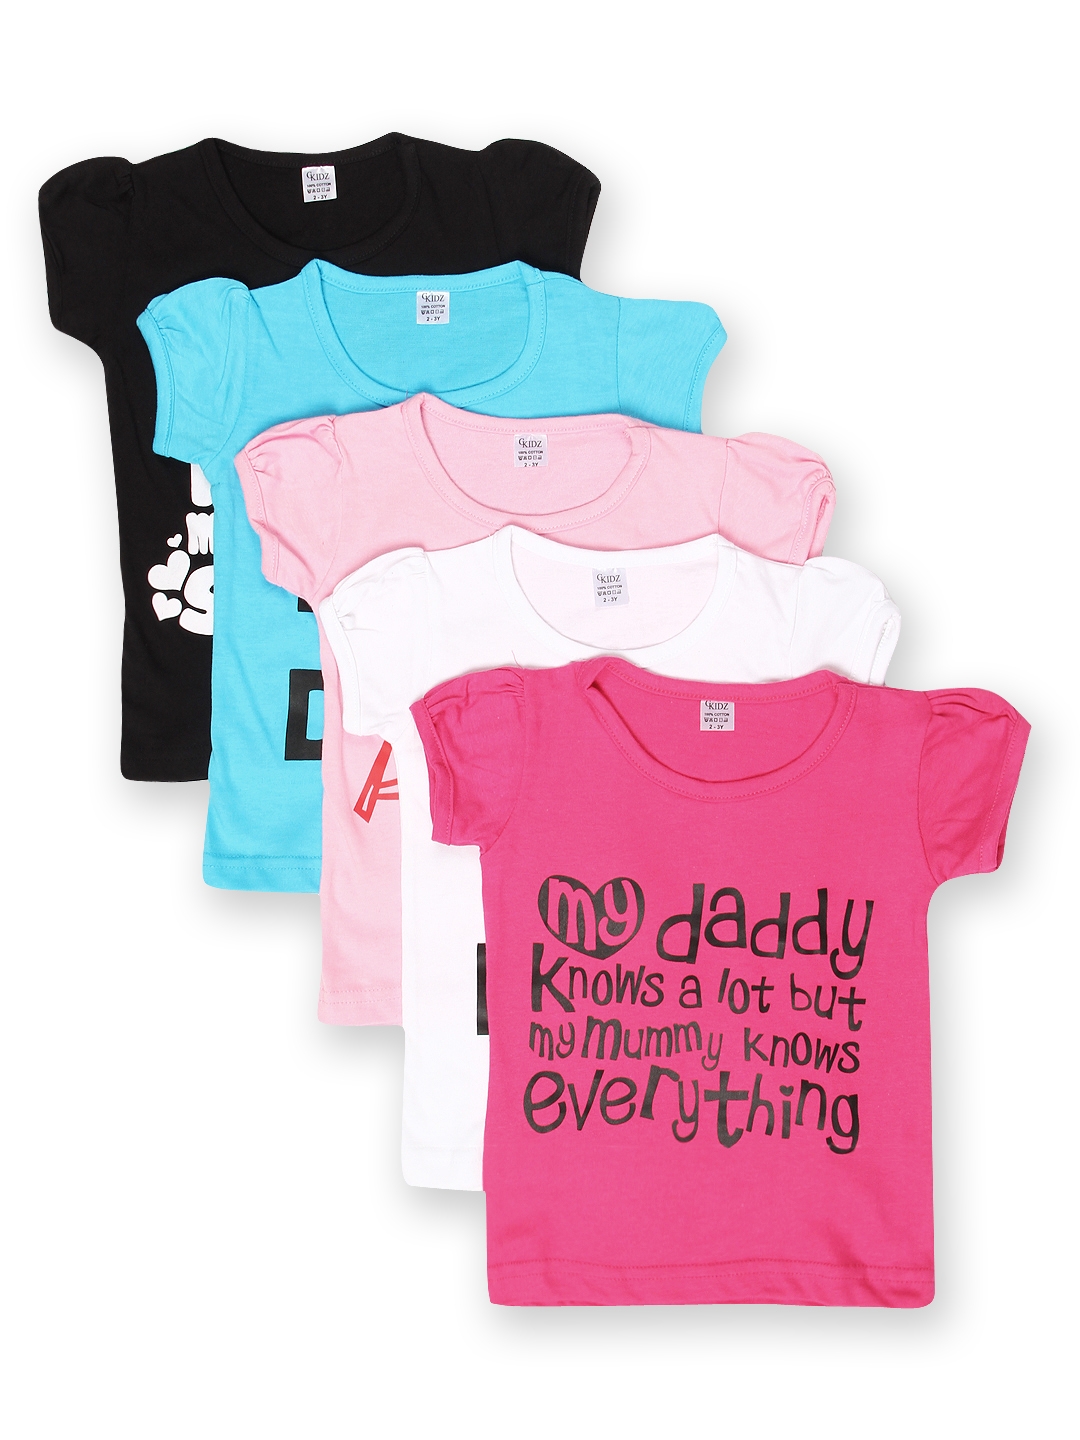 GKIDZ Girls Pack of 5 Printed Pure Cotton T shirts